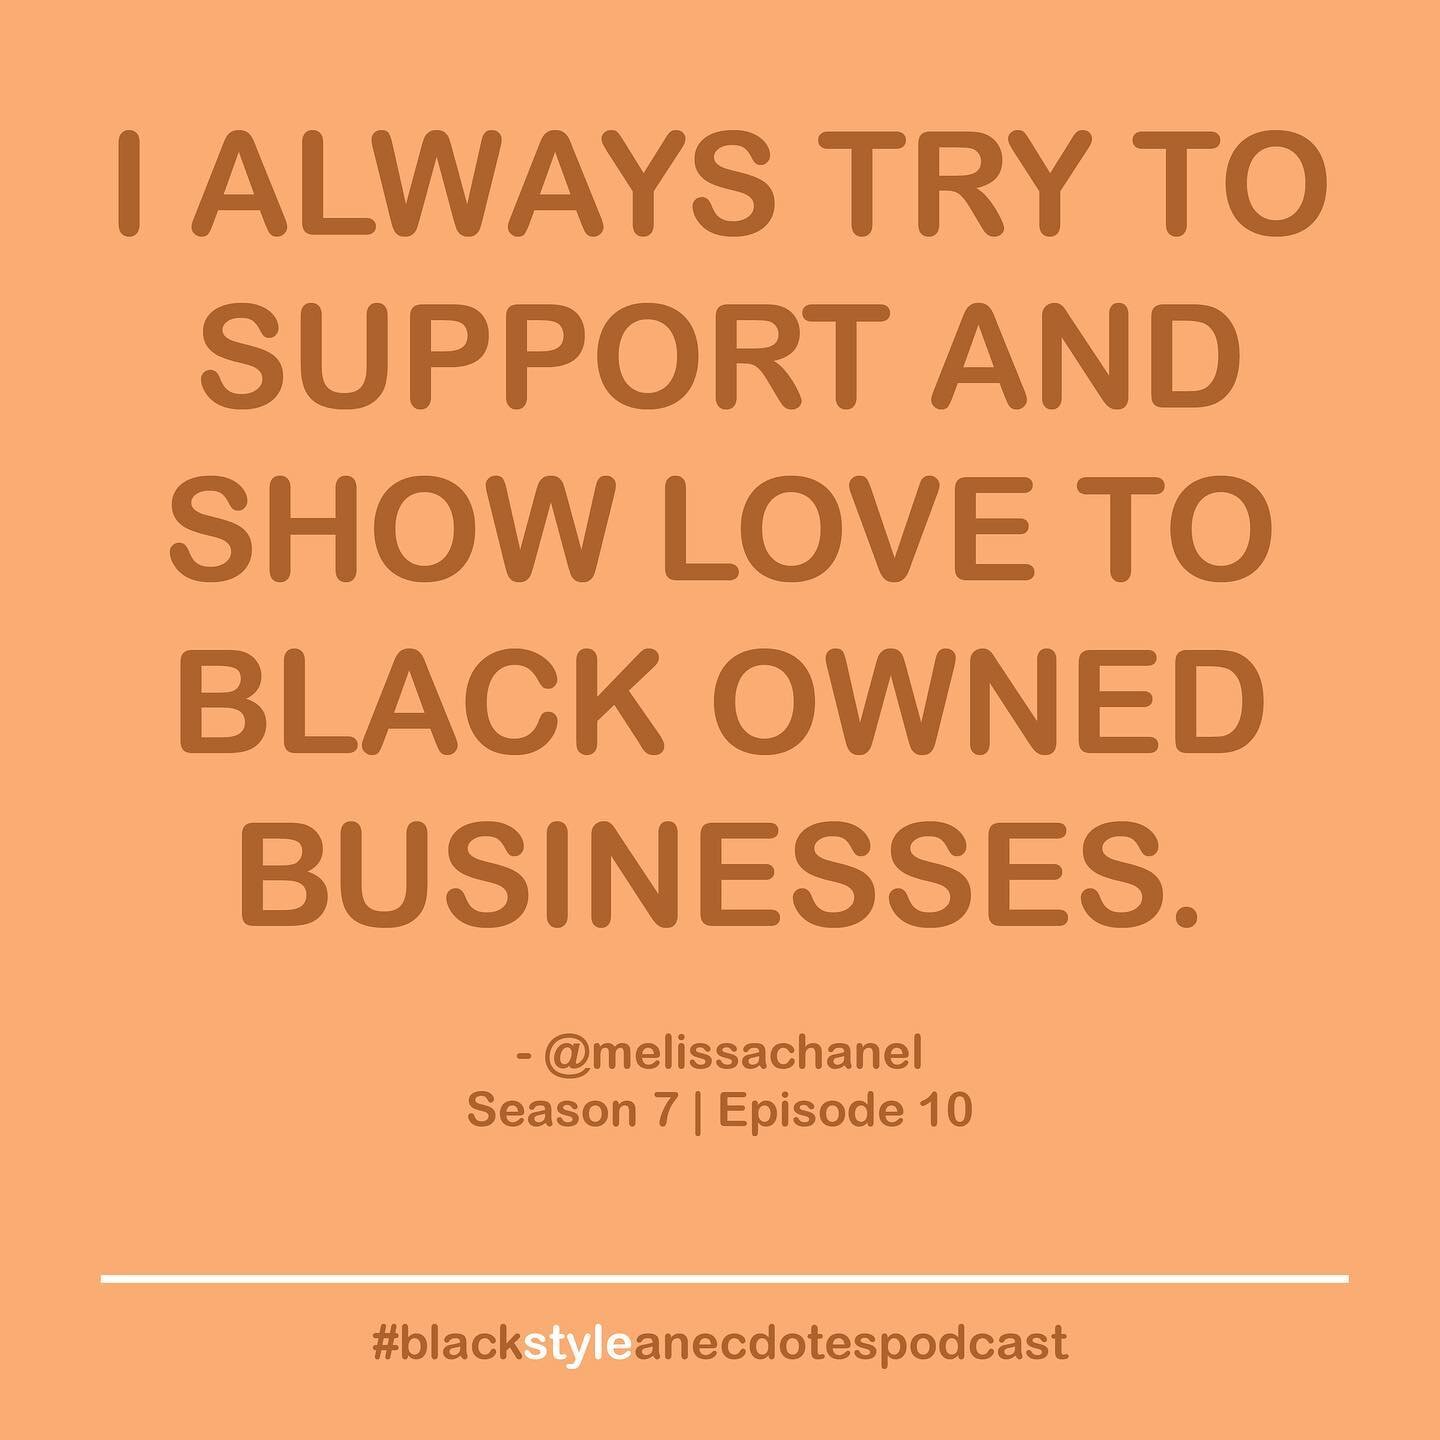 I&rsquo;m really big on supporting Black owned businesses, so I love that @melissachanel shared some of her favorites in the latest Black Style Anecdotes episode! 

Share your favorite stylish BOBs in the comments. I&rsquo;m always looking for new br